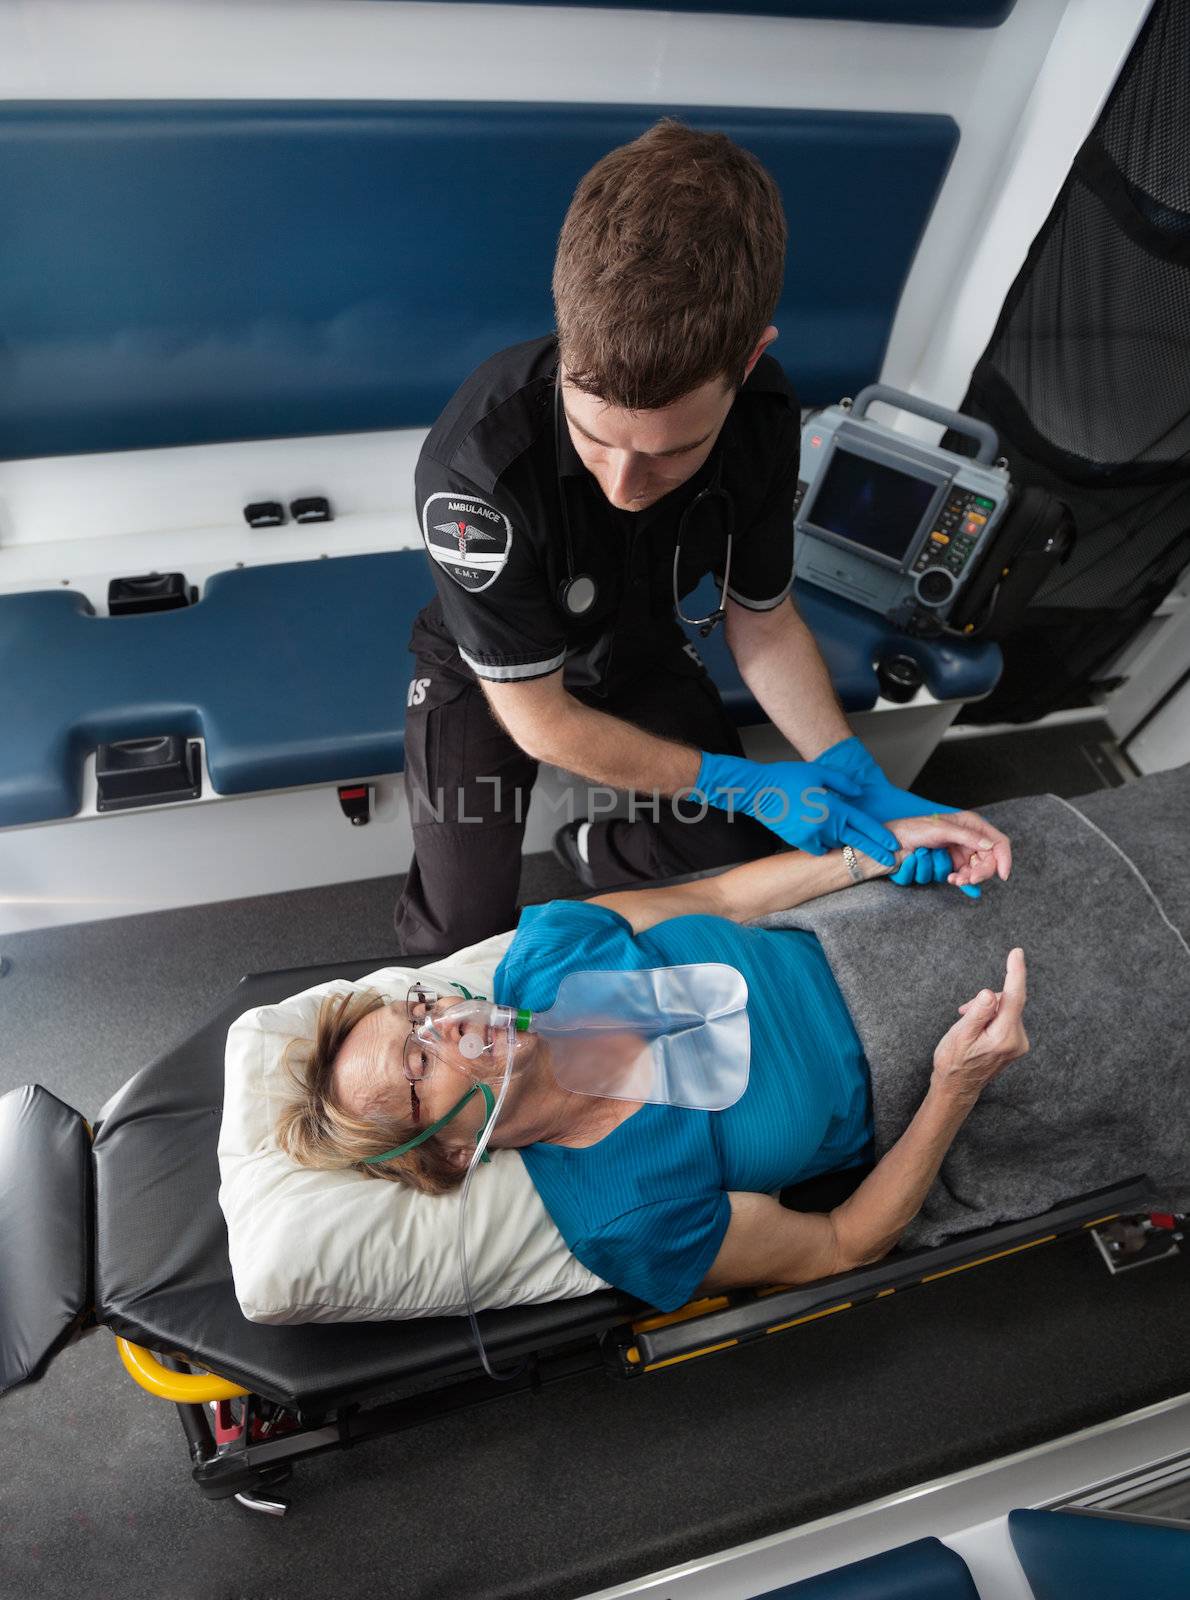 Ambulance Interior with Senior Patient by leaf